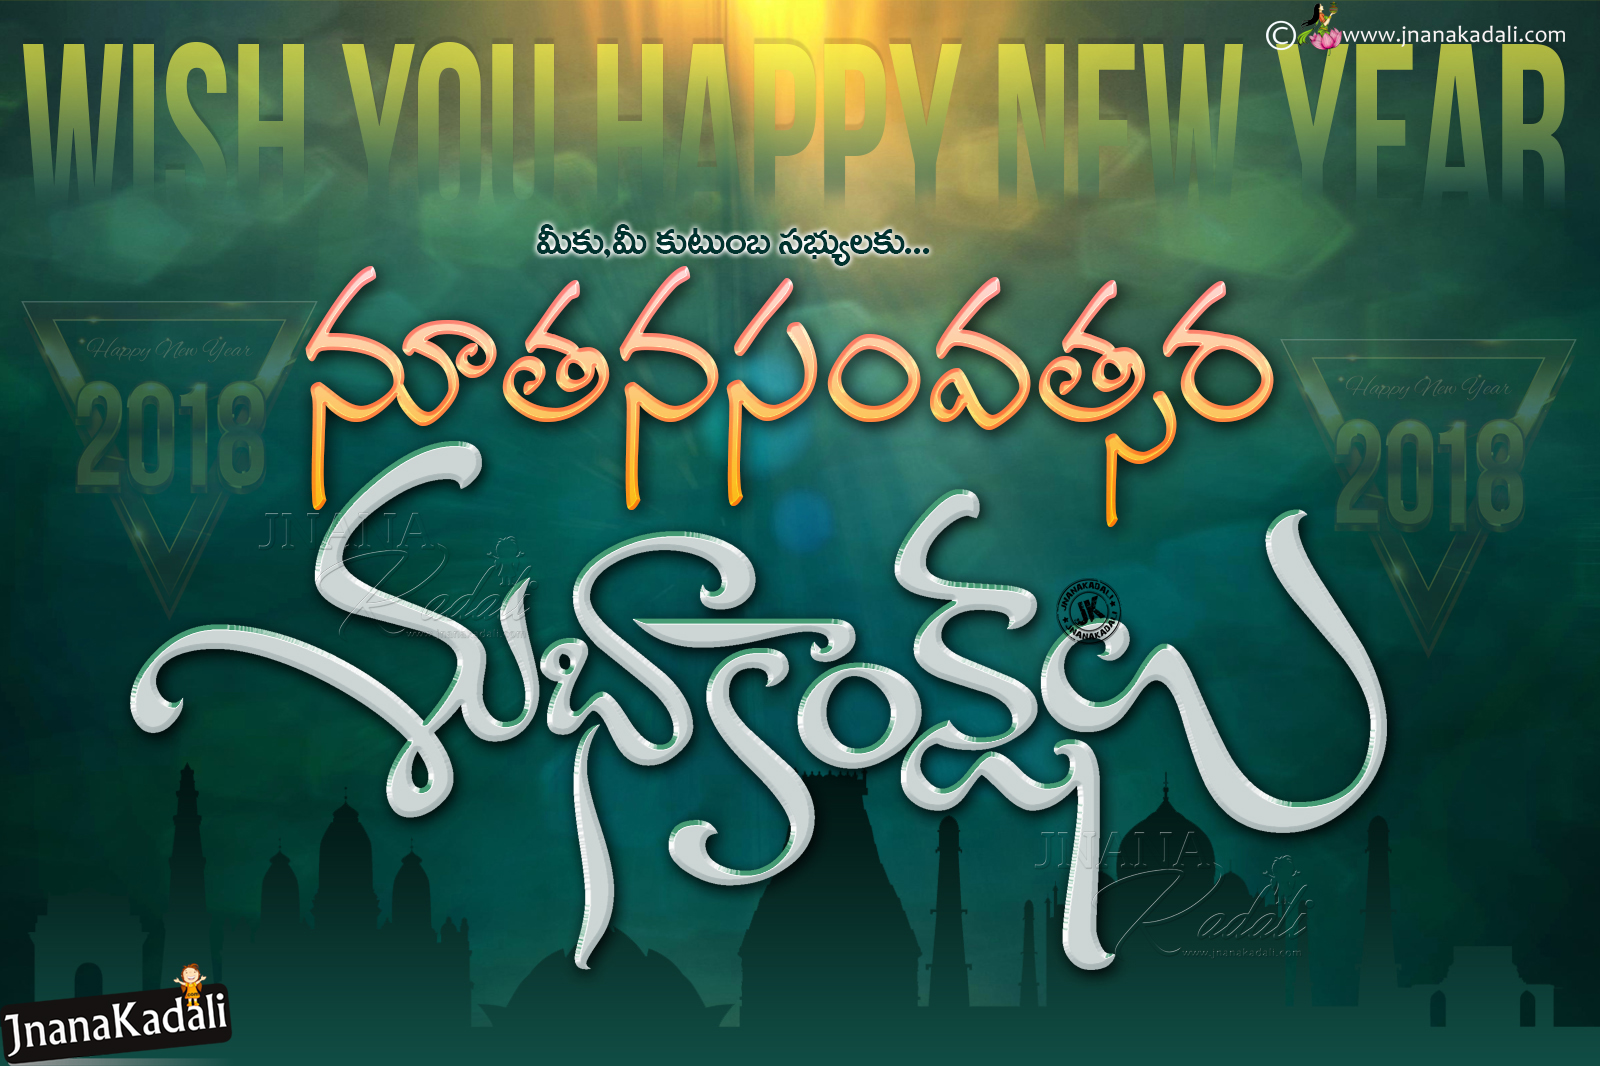 Wishing You A Very Happy New Year 2018 Greetings wallpapers in Telugu